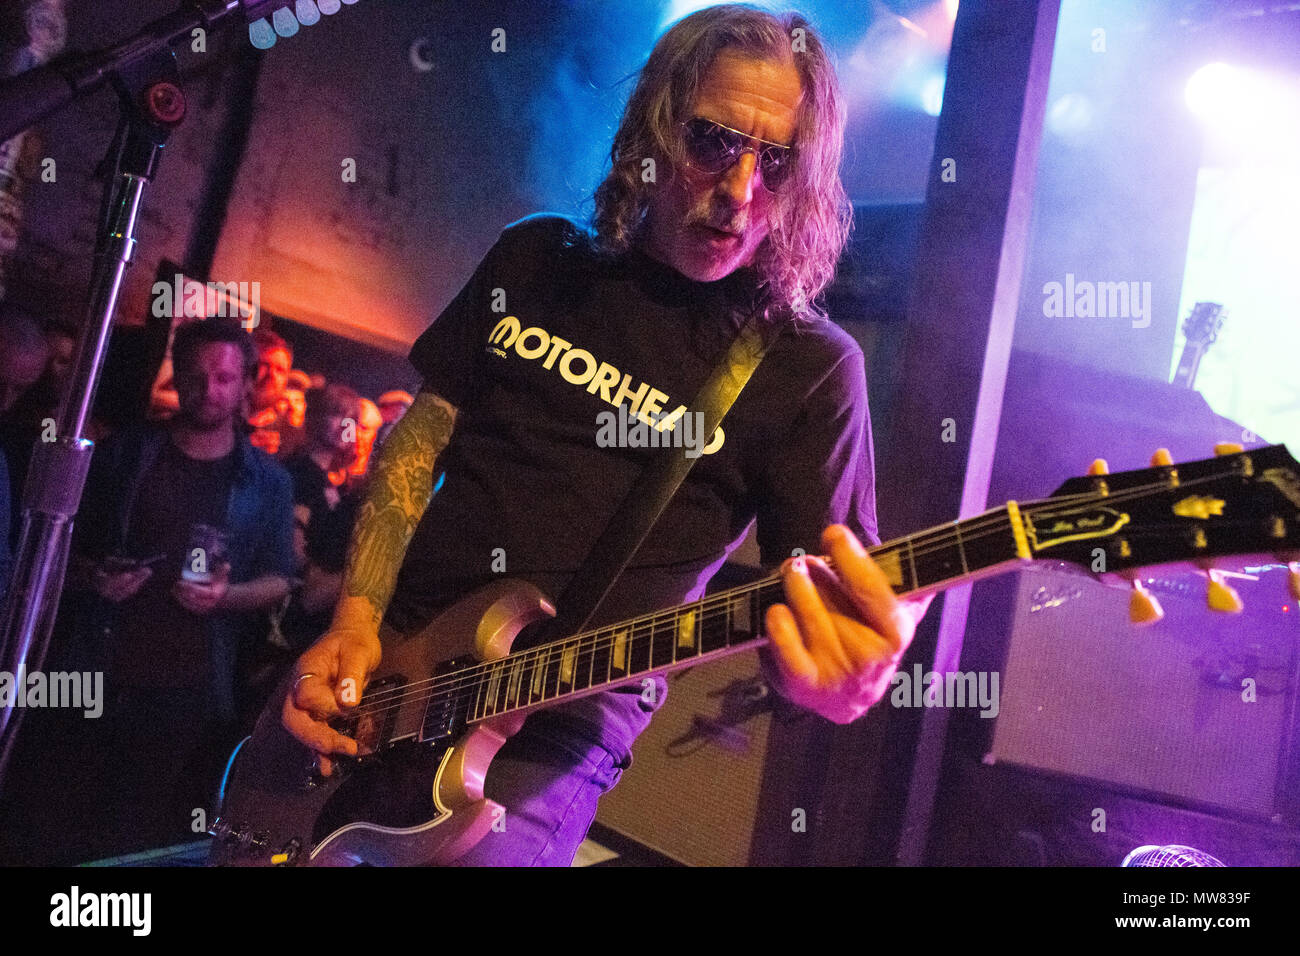 Norway, Oslo - May 23, 2018. The American stoner rock band Monster Magnet  performs a live concert at Blå in Oslo. Here guitarist Phil Caivano is seen  live on stage. (Photo credit: